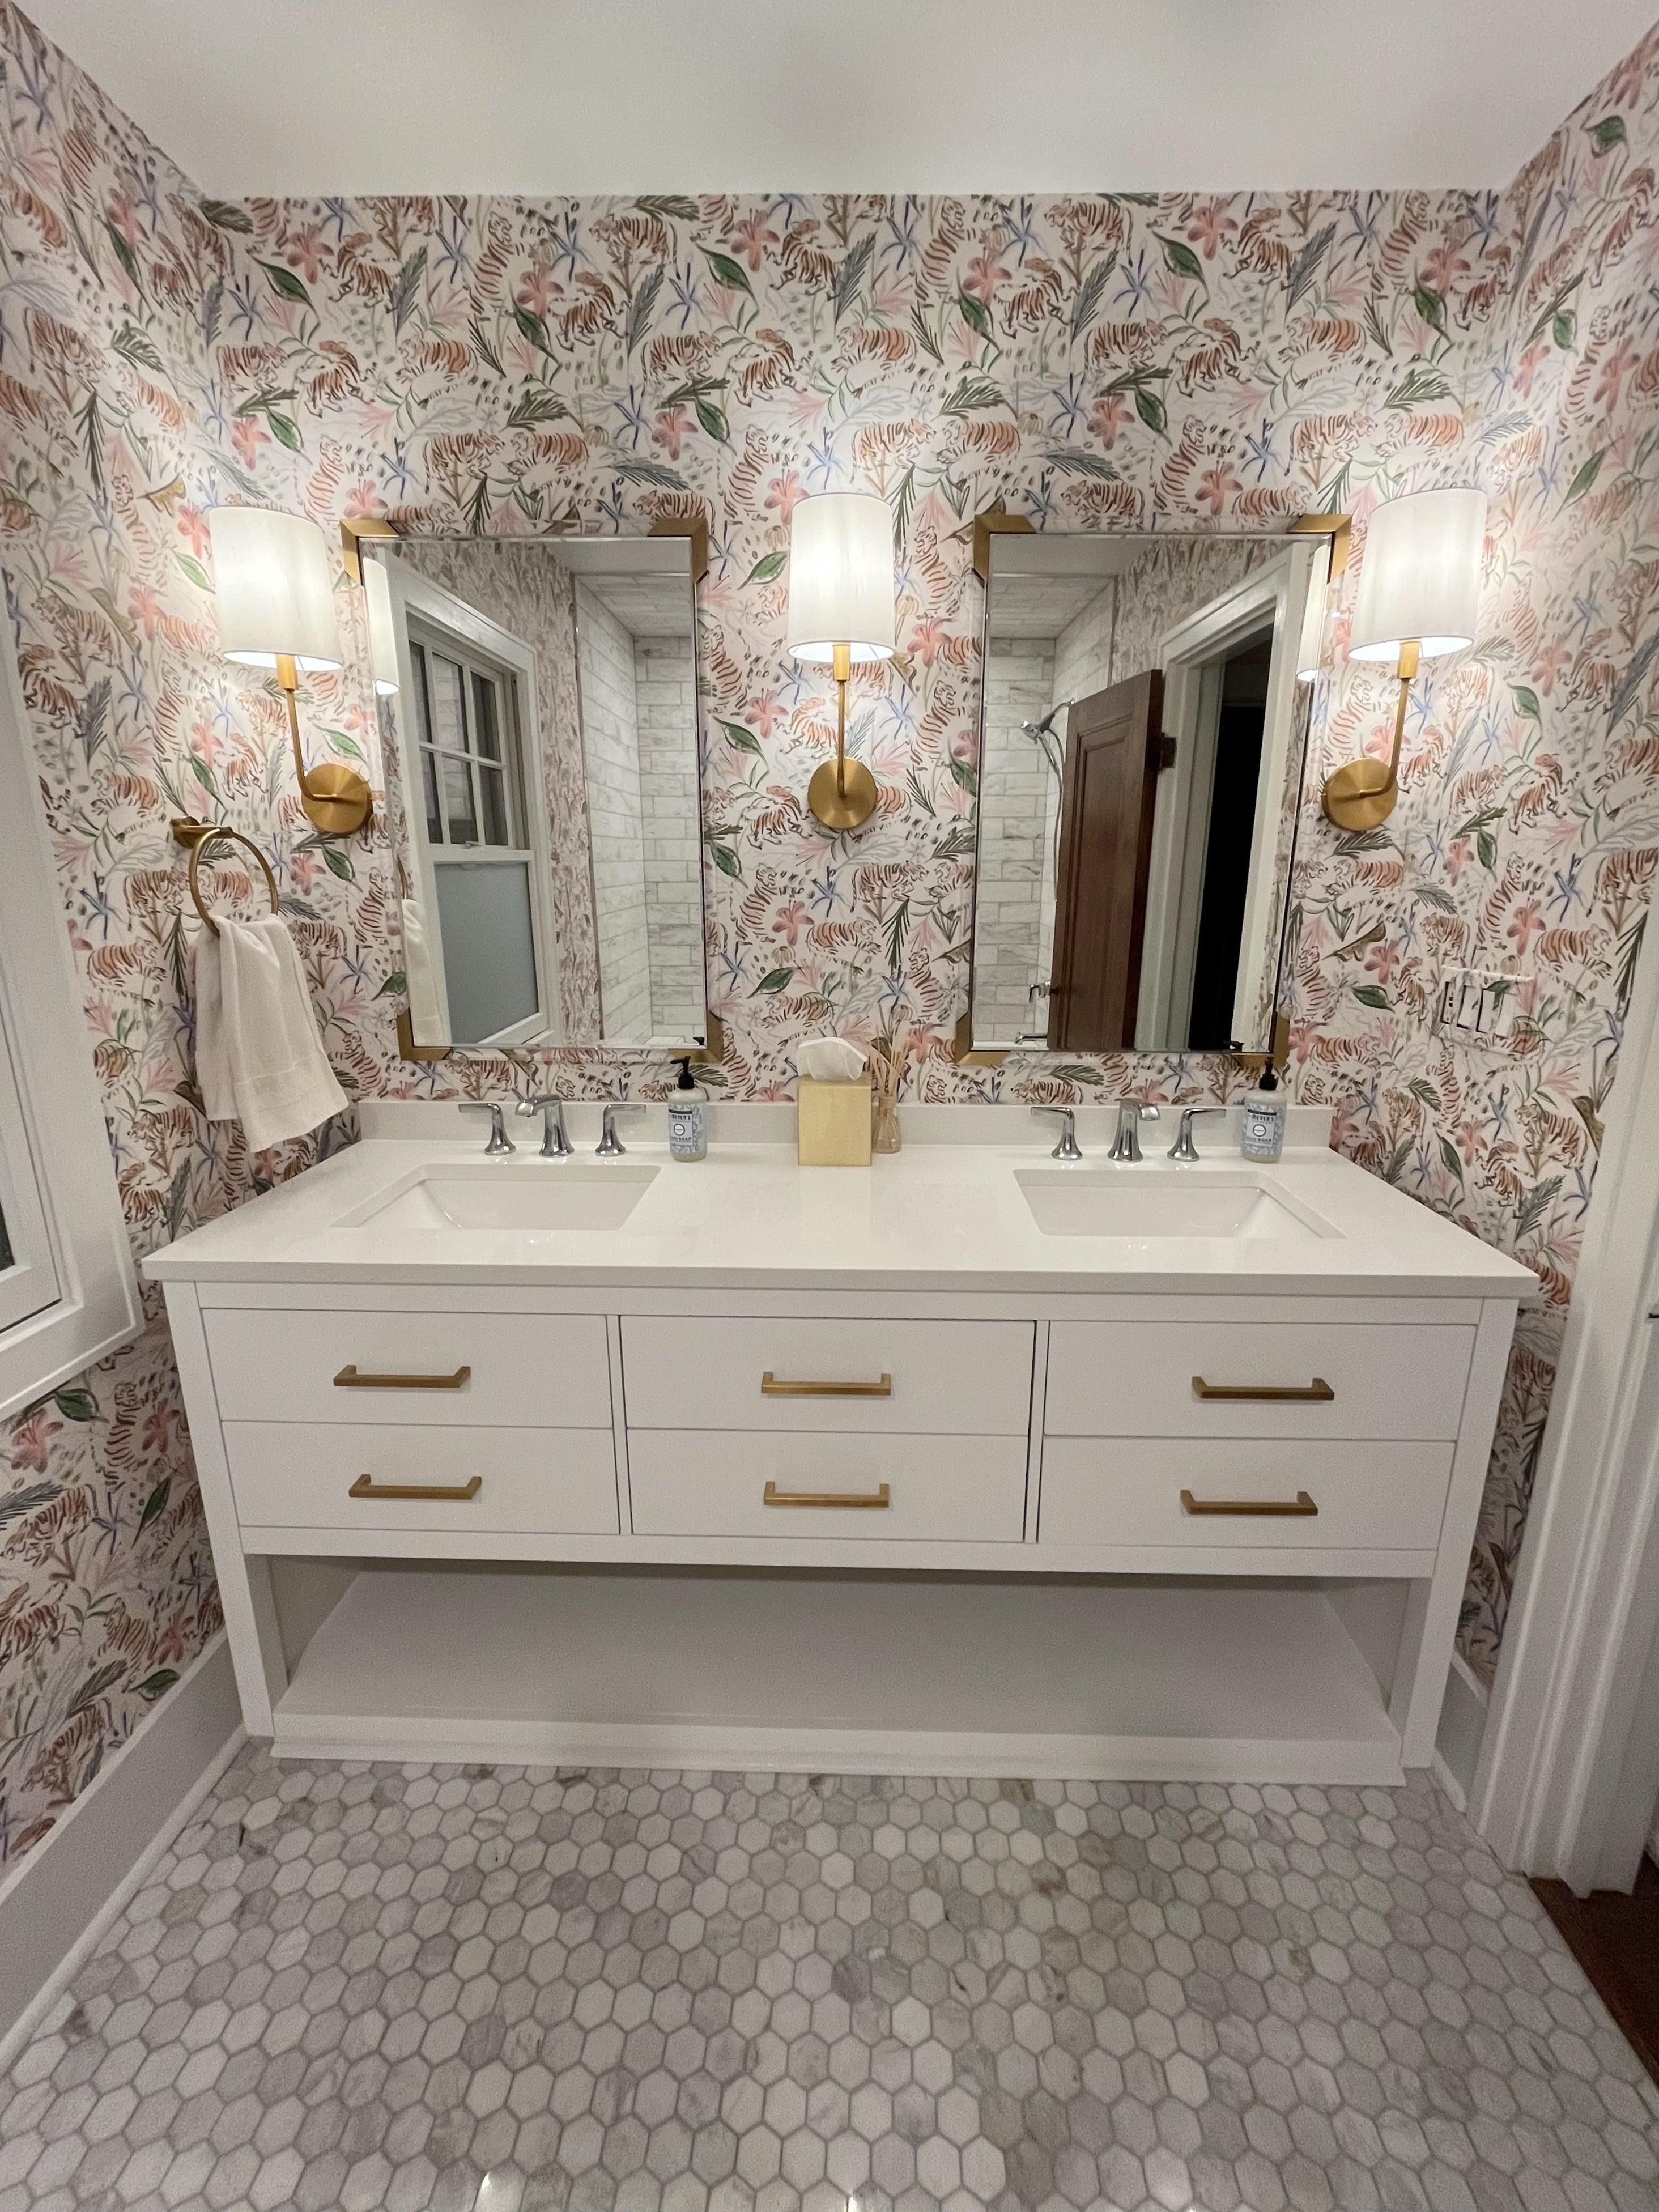 Bathroom with pink chinoiserie tiger wallaper and large white vanity